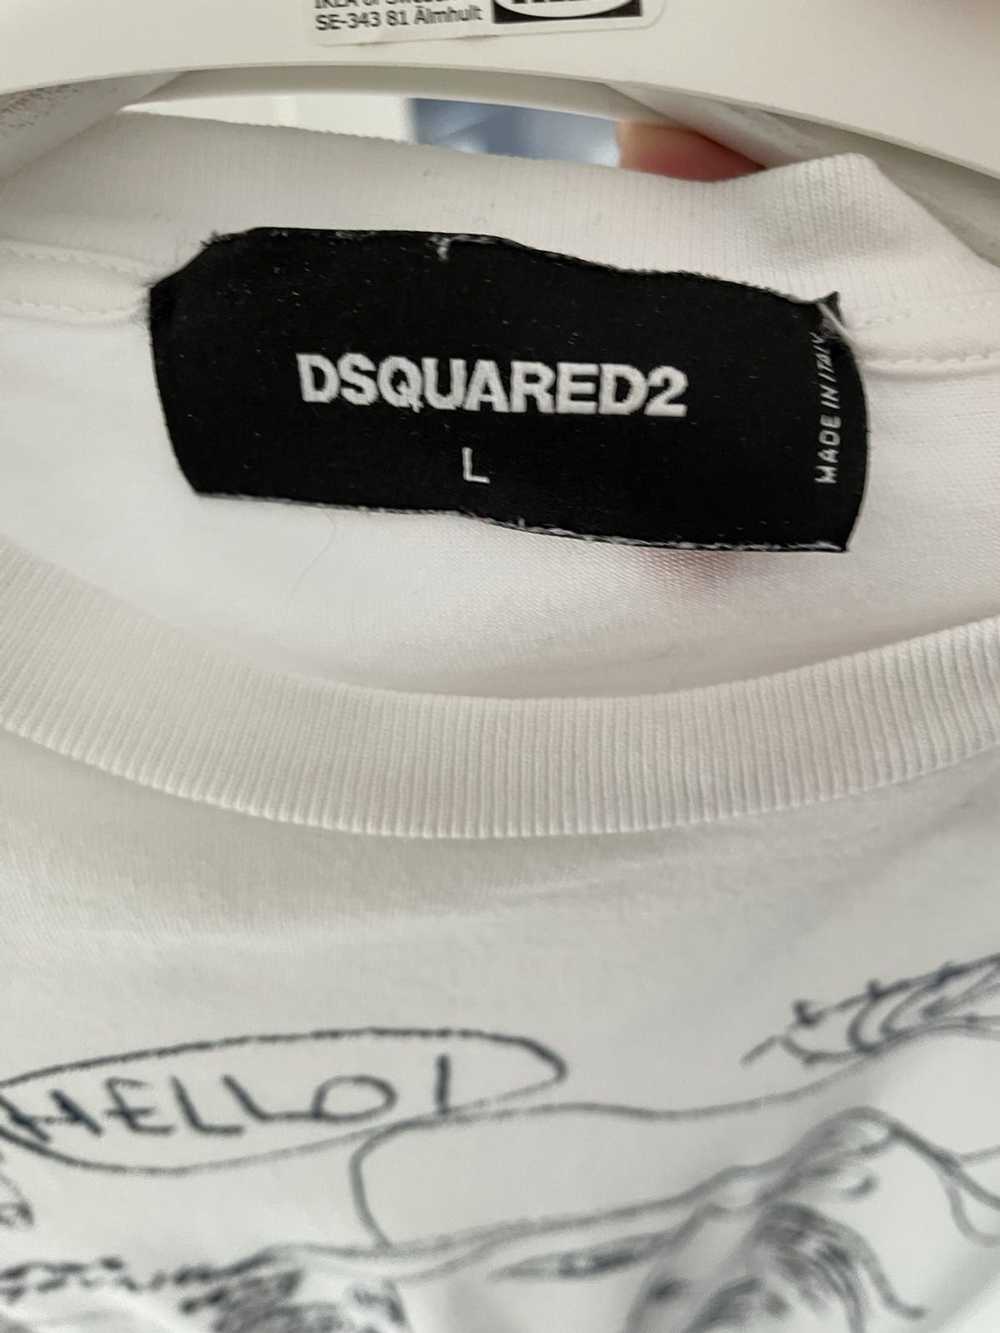 Dsquared2 Dsquared relief print tee - image 2